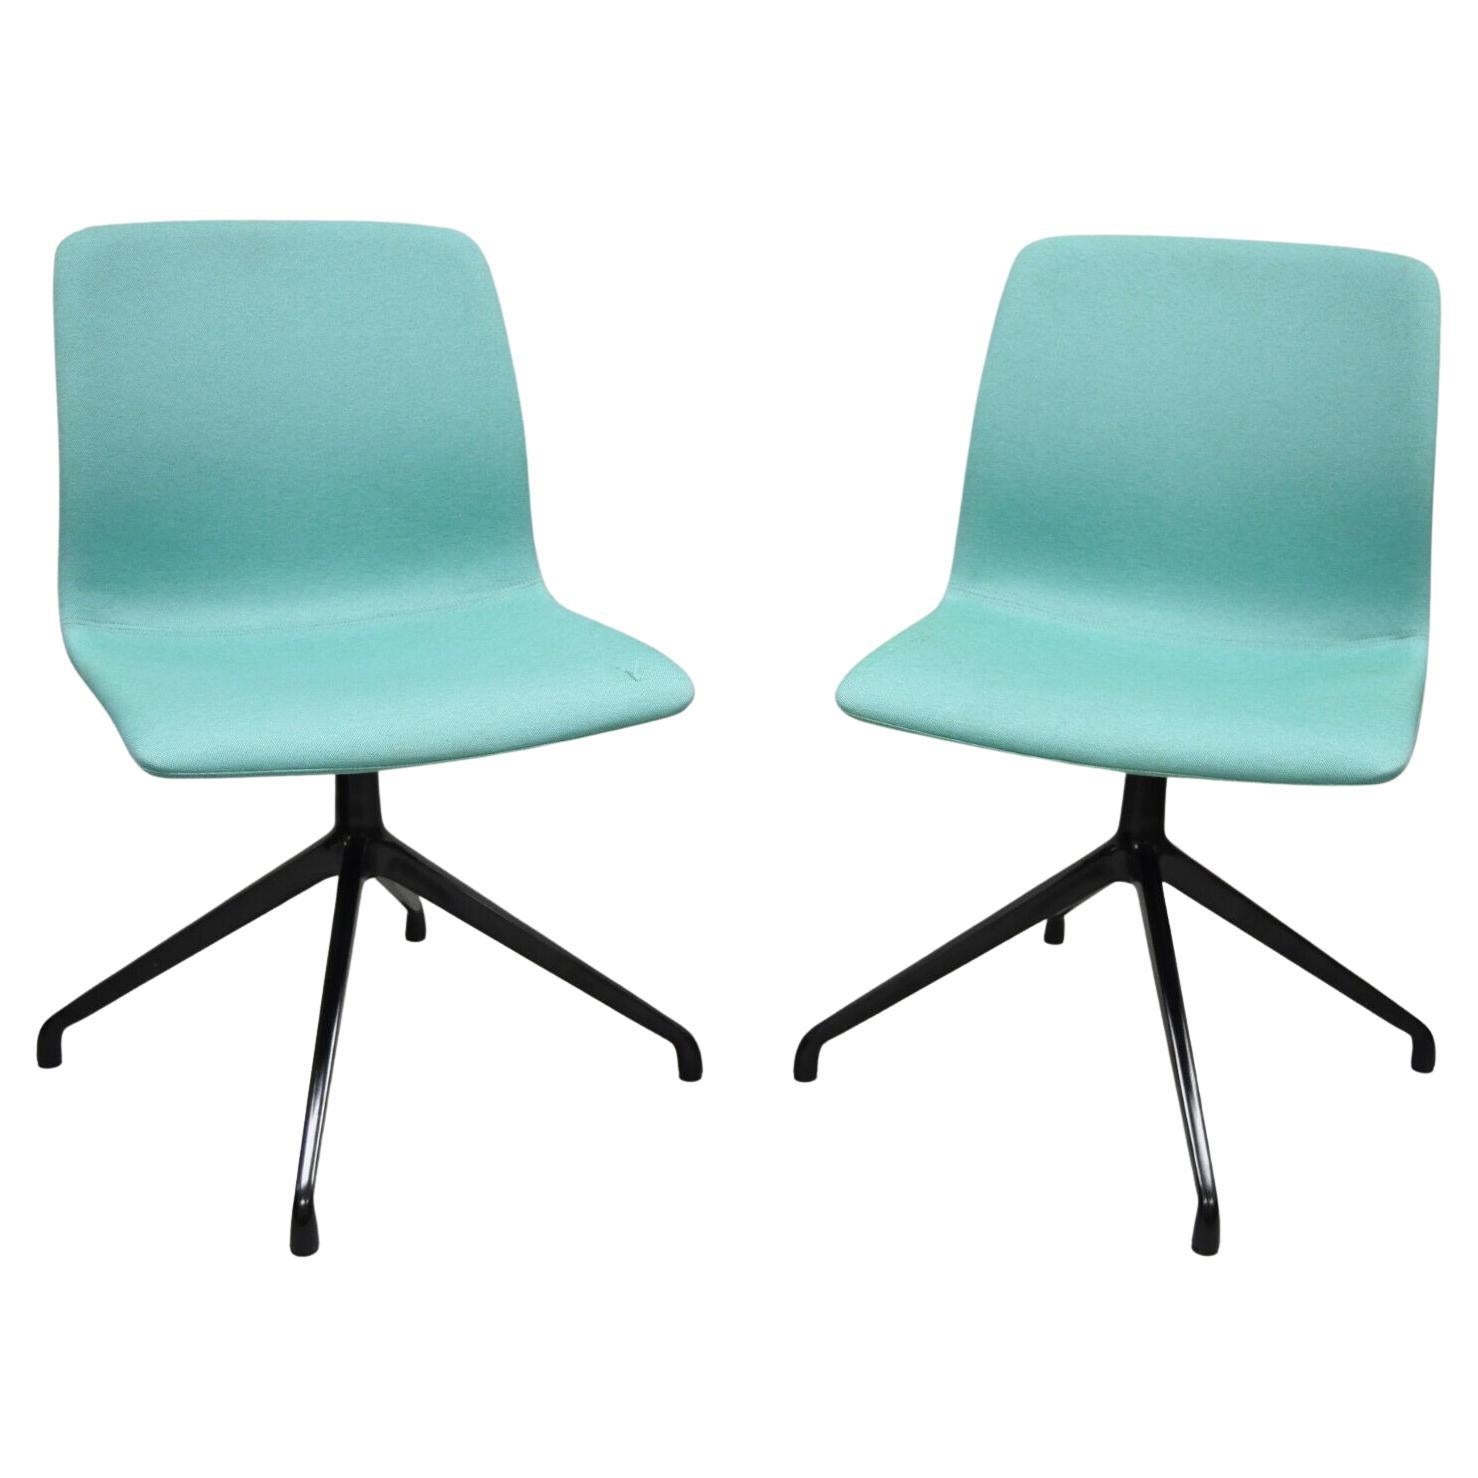 ODS Hairpin Swivel Base Blue Upholstered Side Chair, a Pair